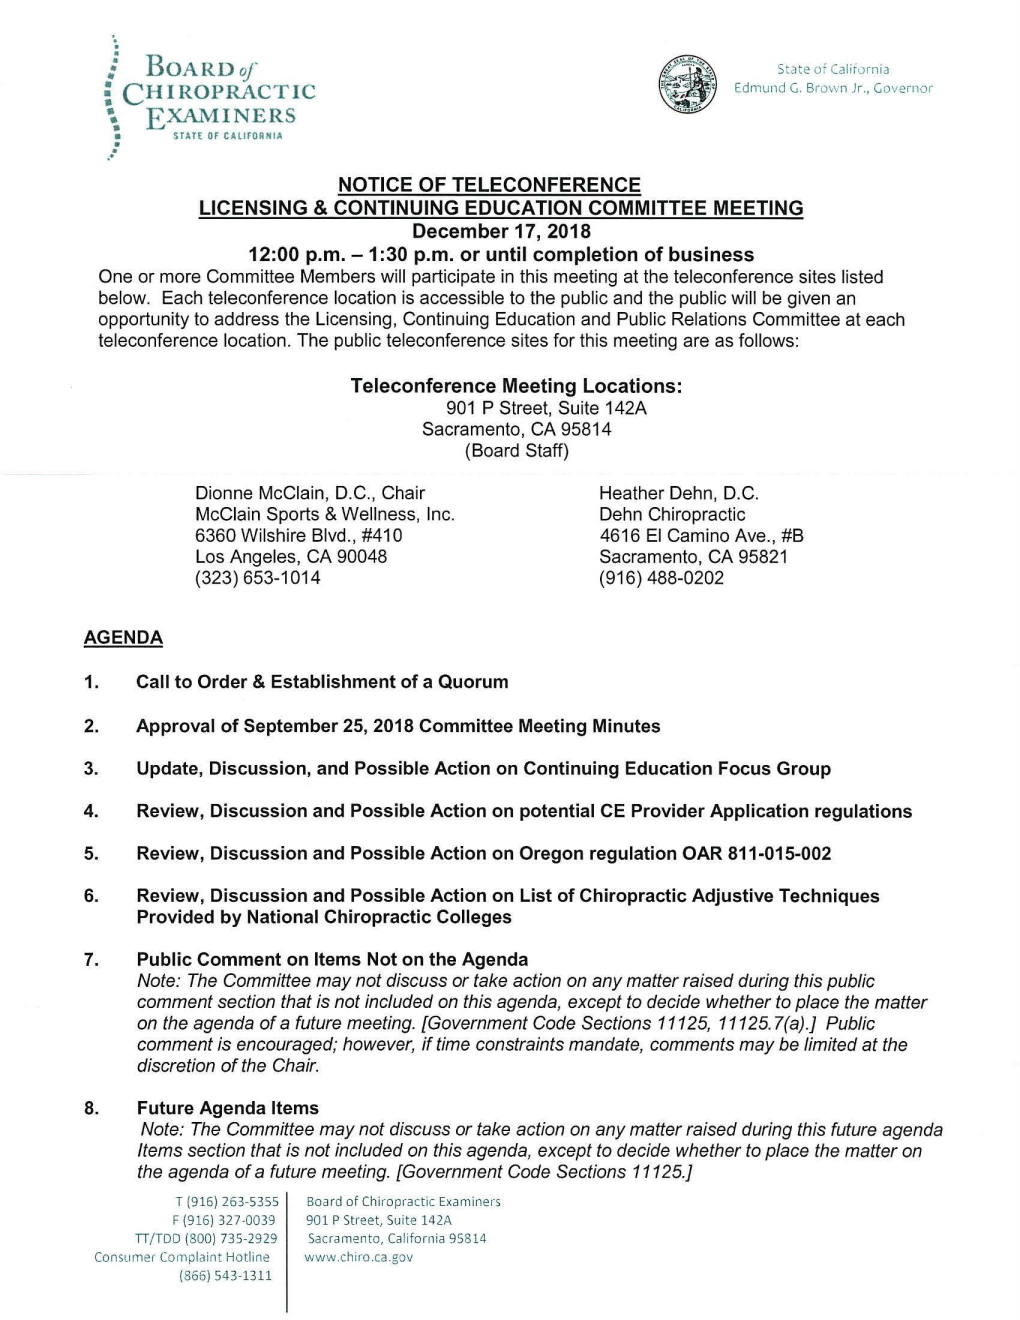 Notice of Teleconference Licensing & Continuing Education Committee Meeting